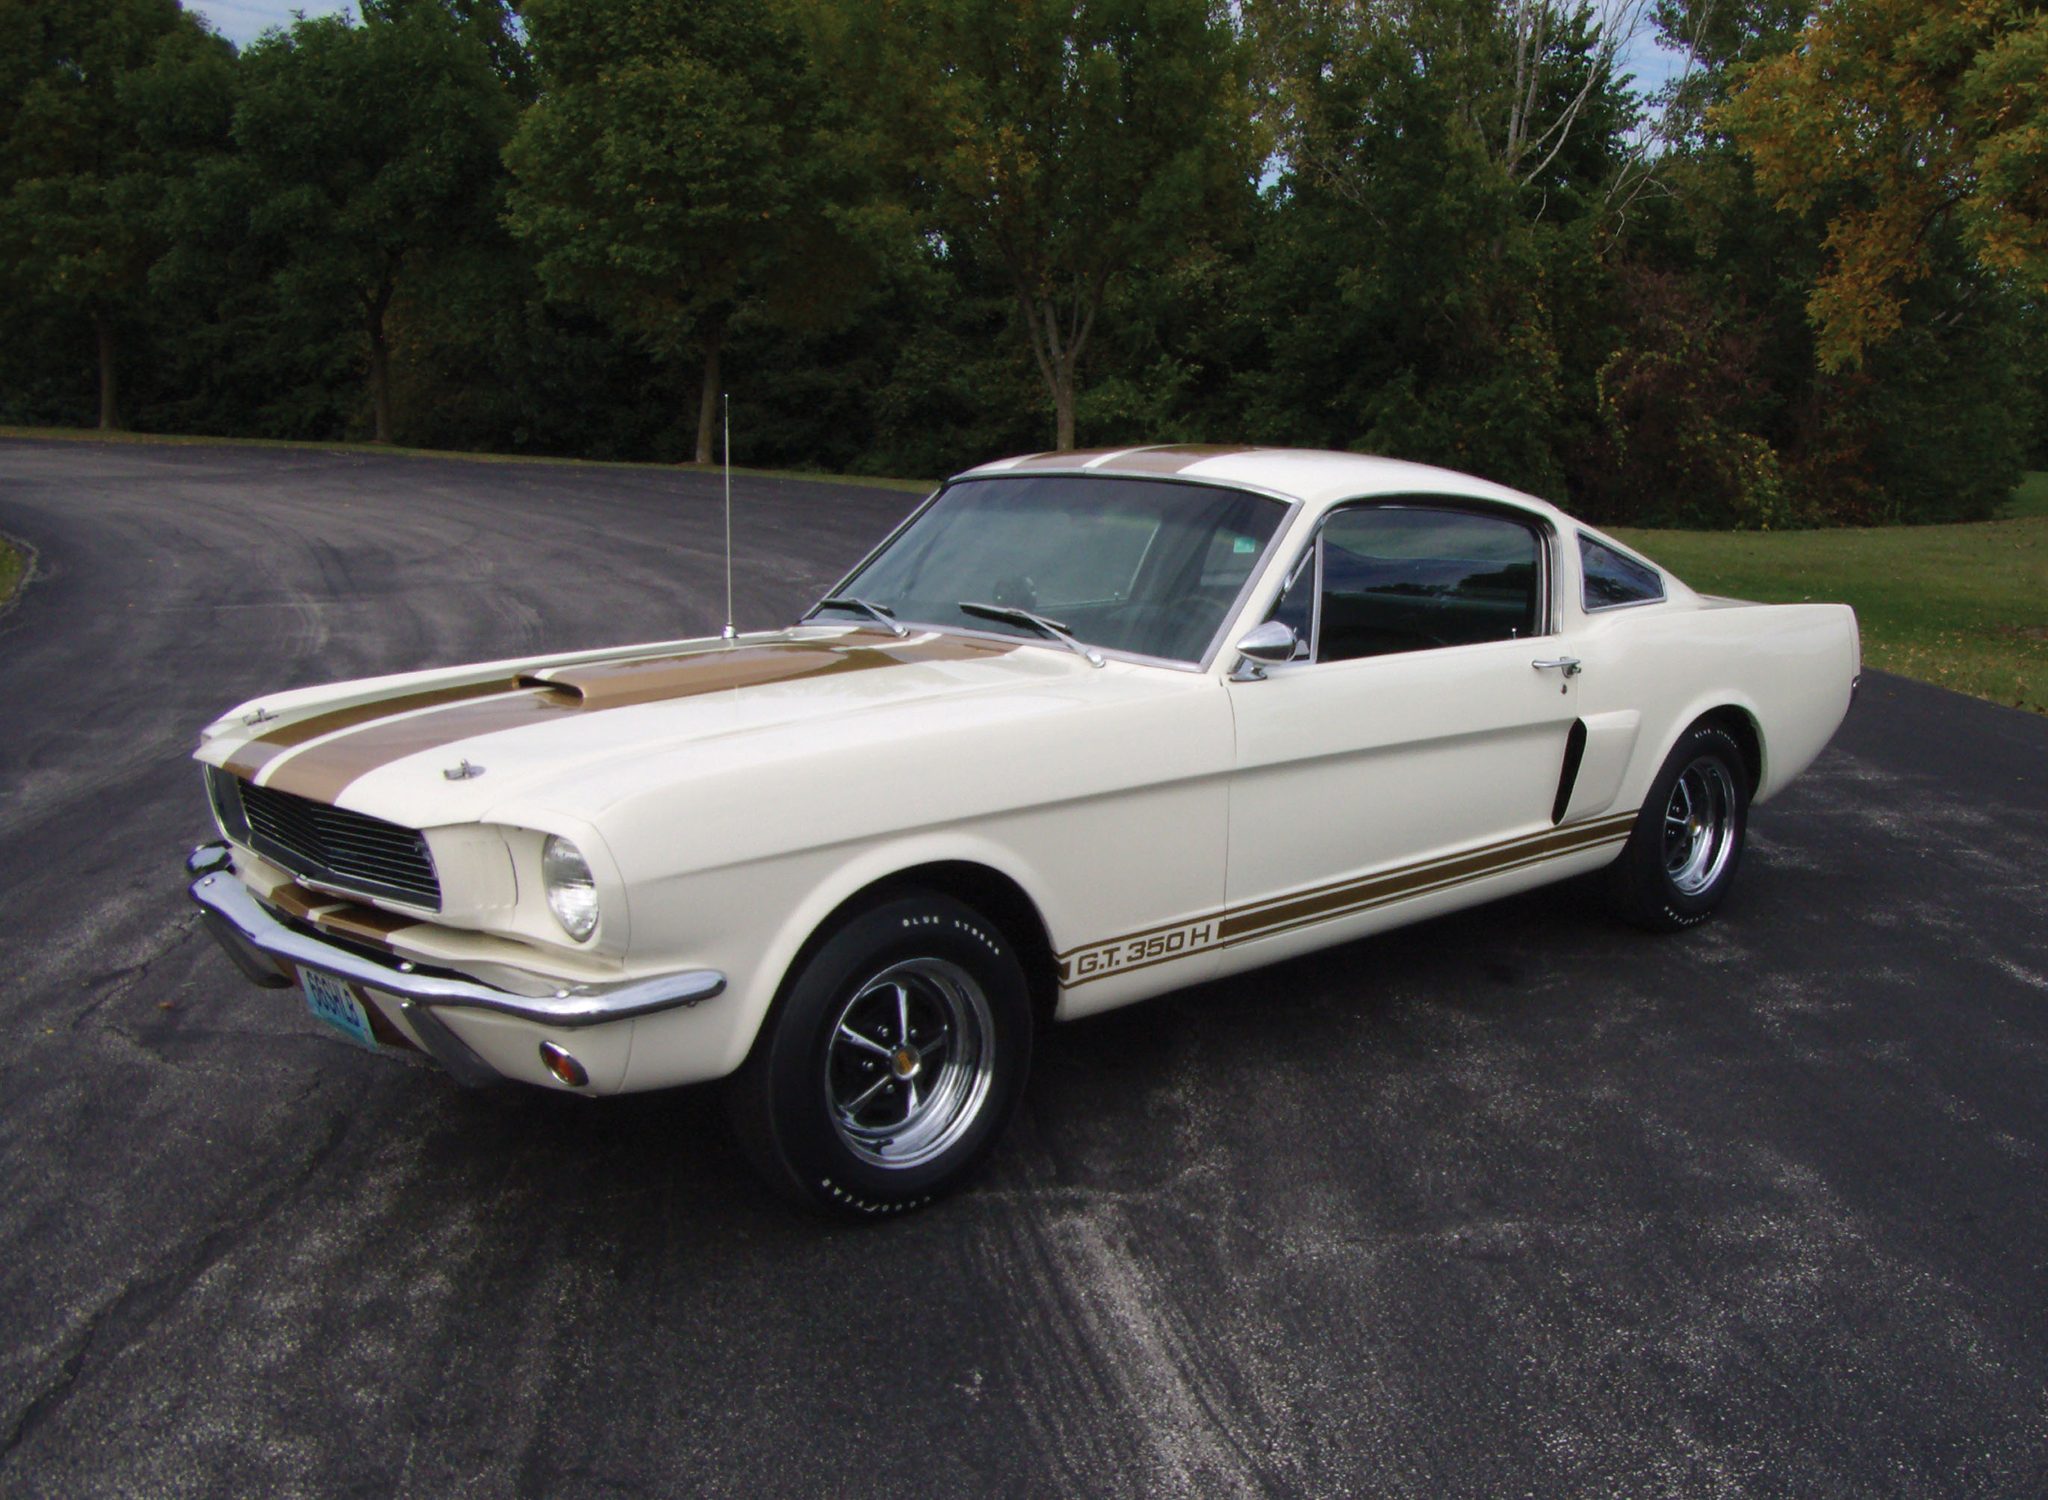 Mustang Of The Day: 1966 Shelby Mustang GT350-H